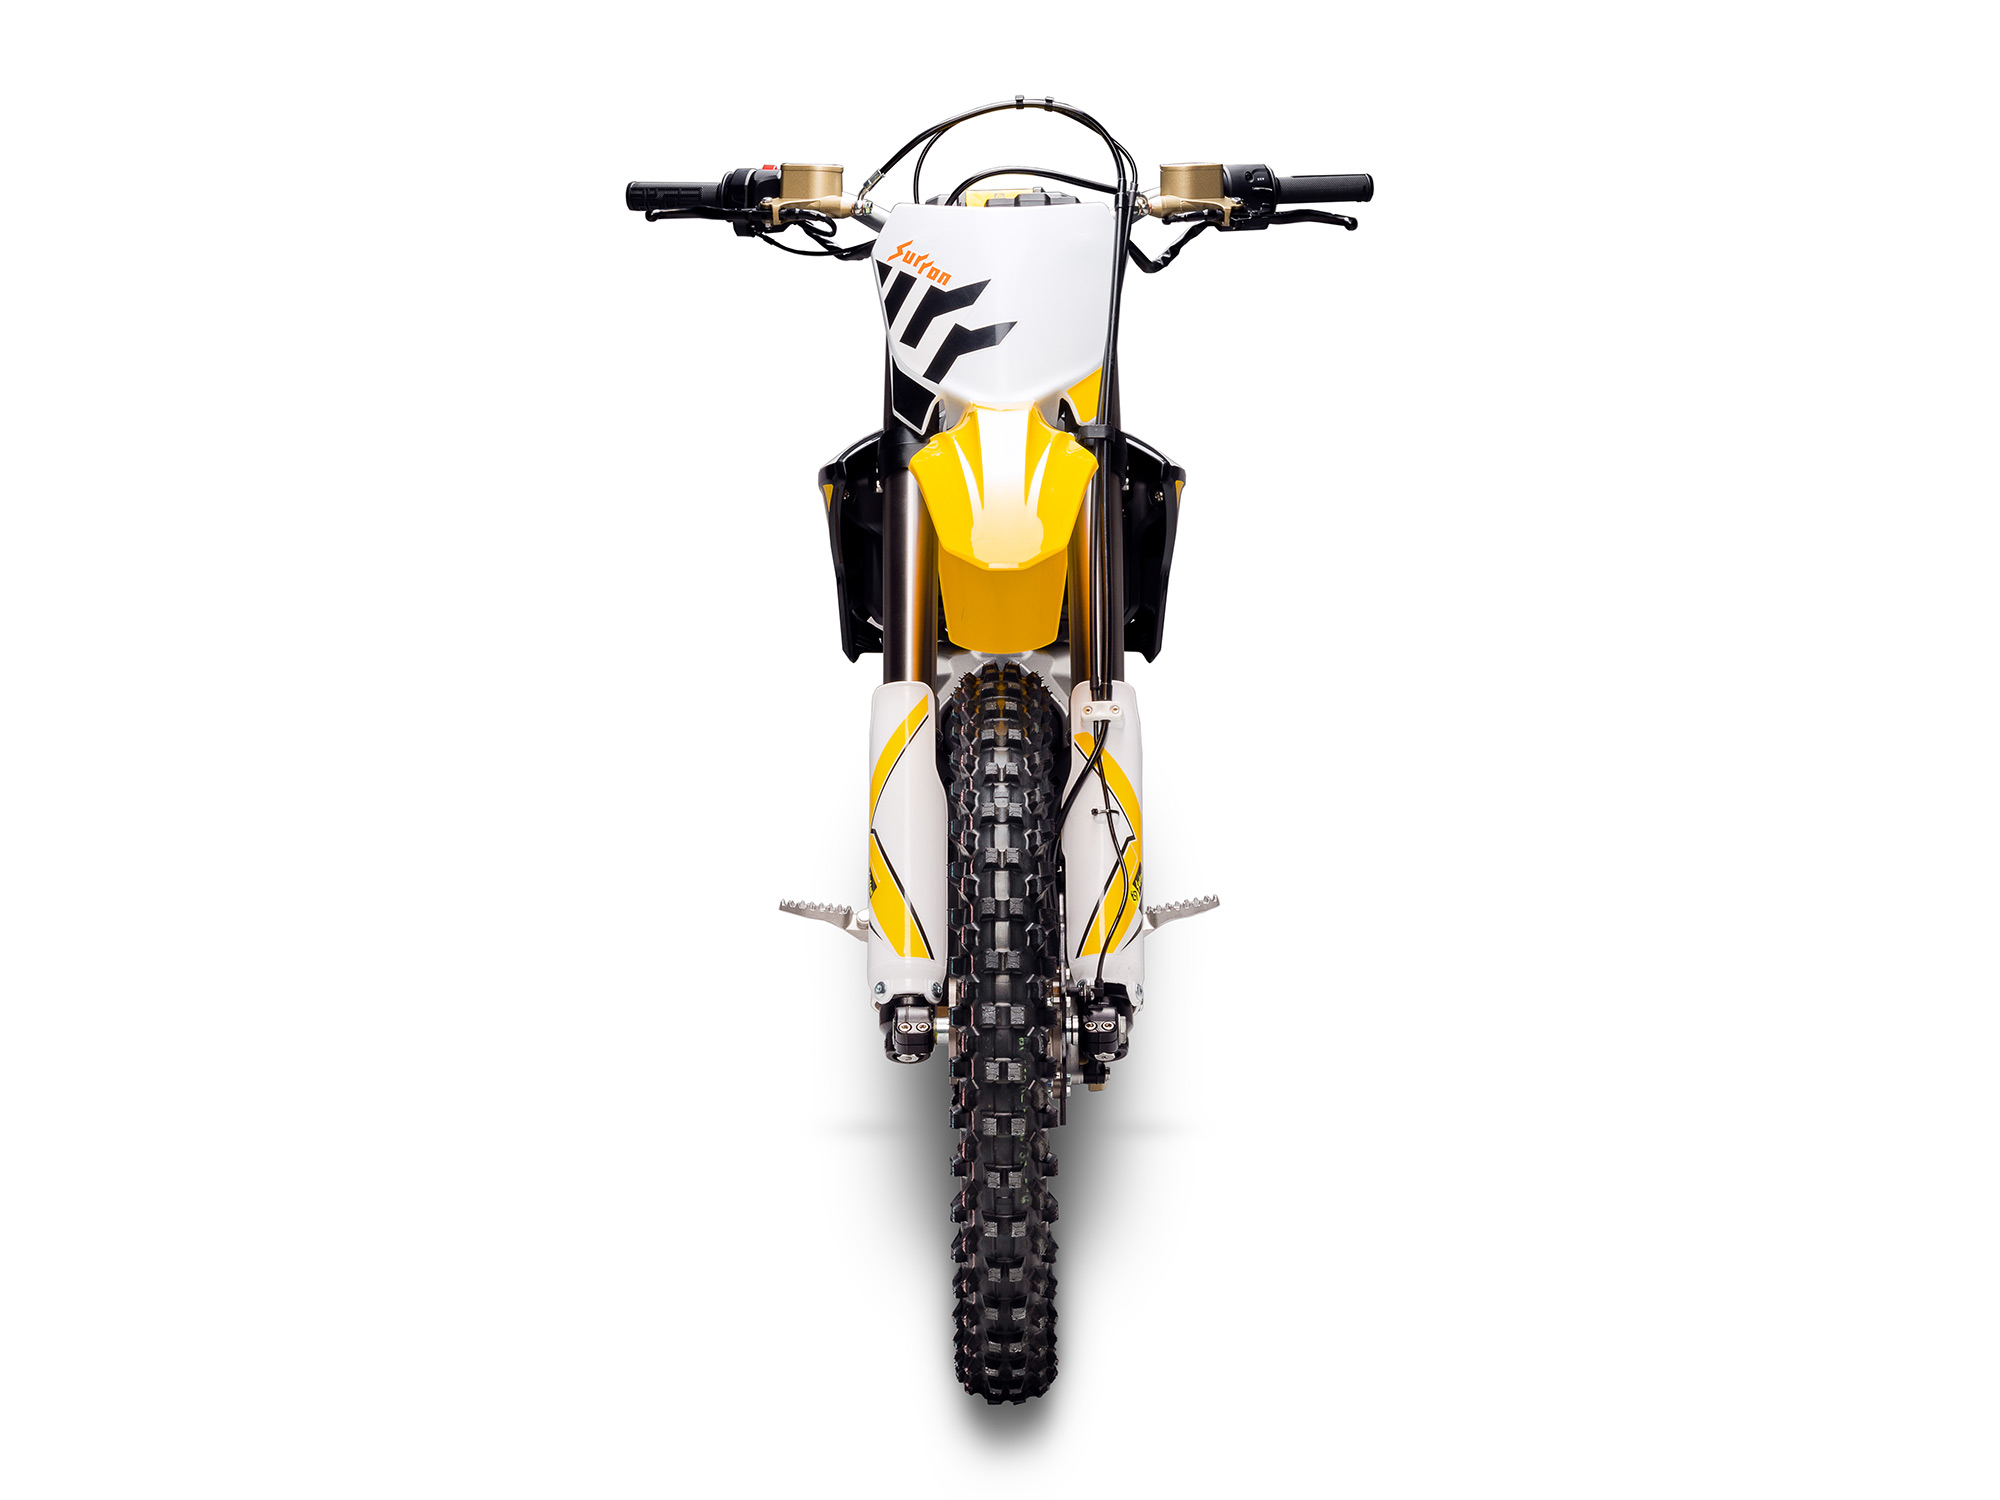 2023 Surron Storm Bee F Electric Dirt Bike First Look - Dirt Rider